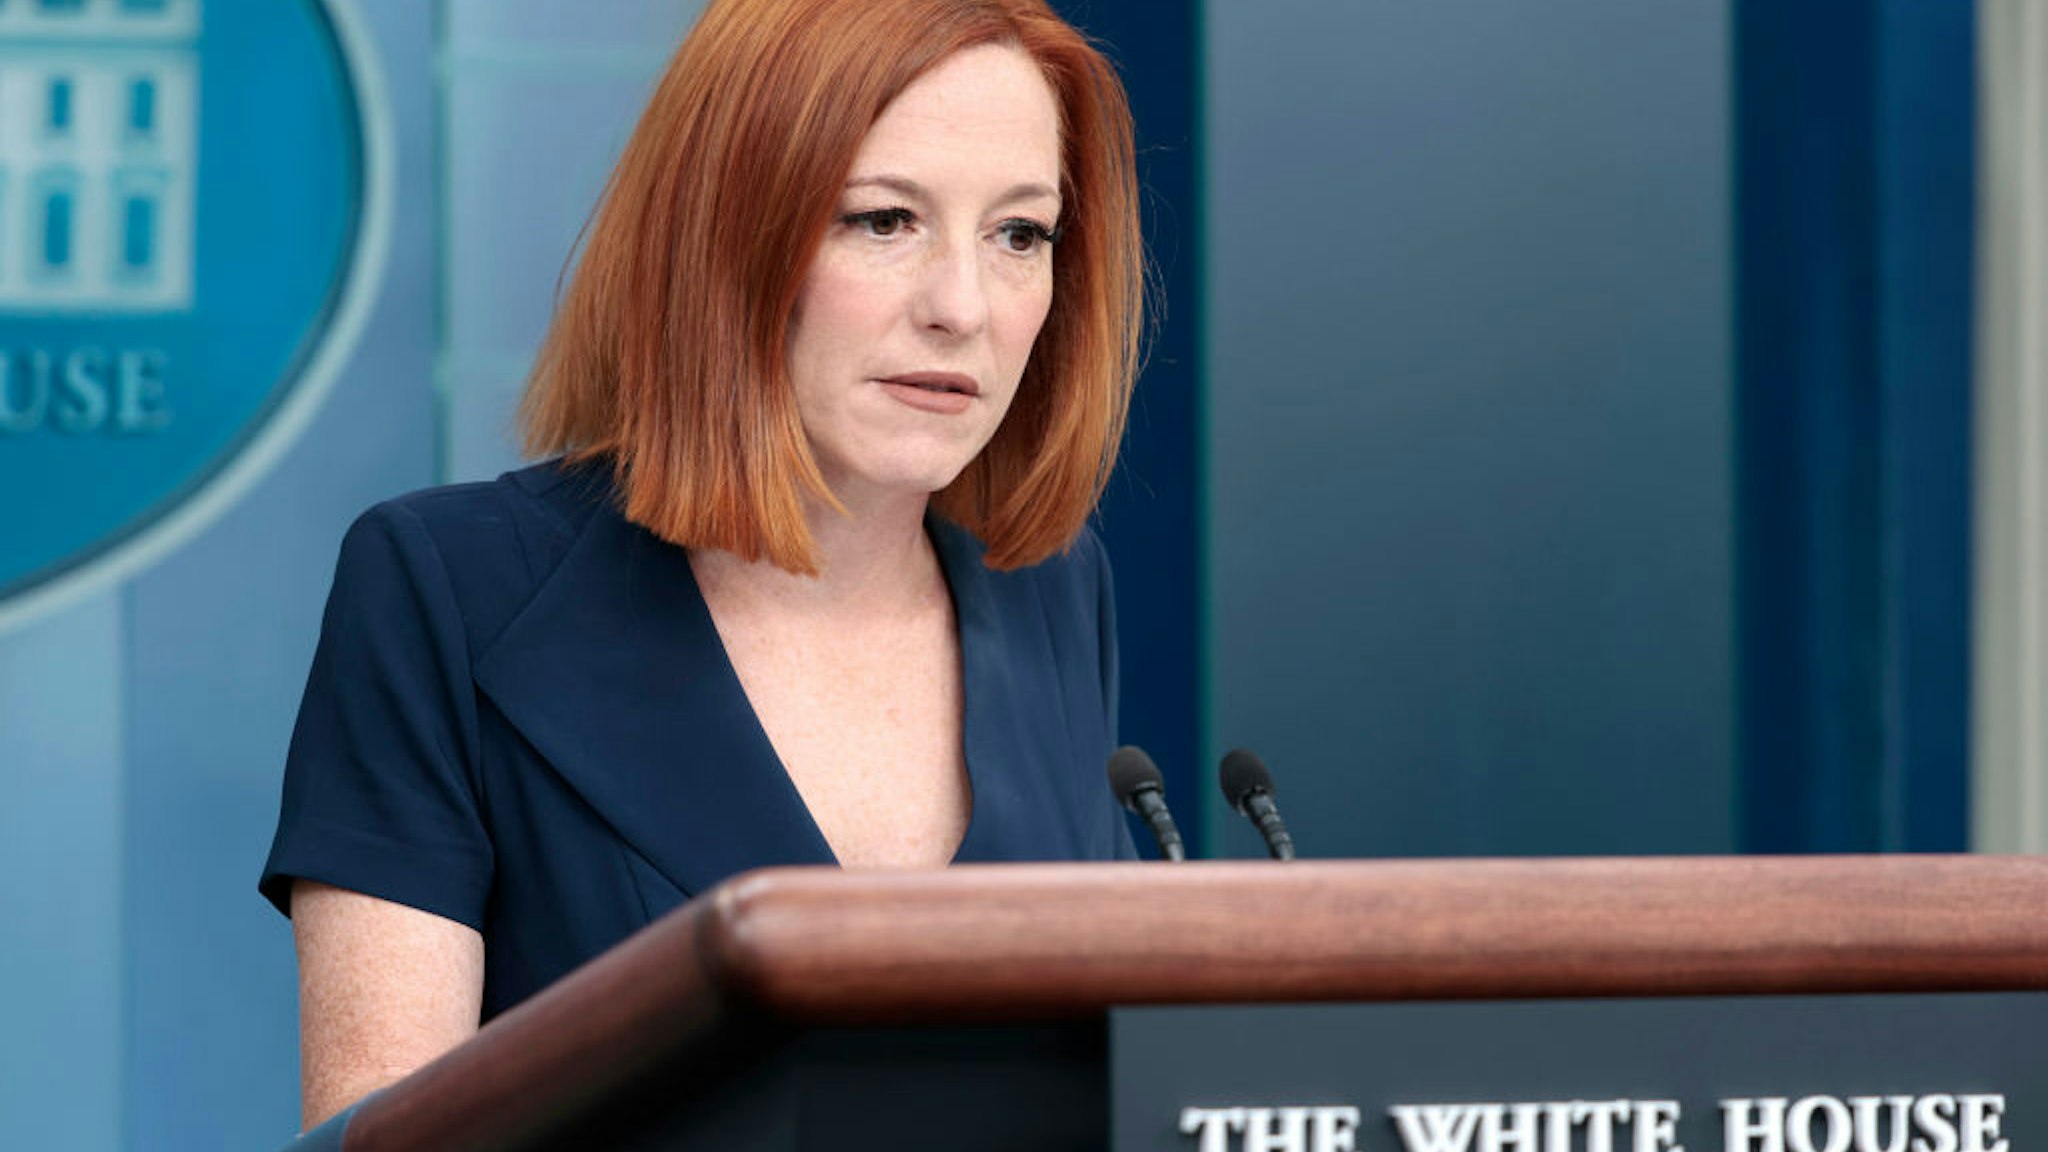 WASHINGTON, DC - APRIL 28: White House Press Secretary Jen Psaki speaks at a daily press conference in the James Brady Press Briefing Room of the White House on April 28, 2022 in Washington, DC. During the briefing Psaki took questions on U.S. President Joe Biden's possible future student loan forgiveness legislation and President Biden's request for further aid for Ukraine from Congress. (Photo by Anna Moneymaker/Getty Images)